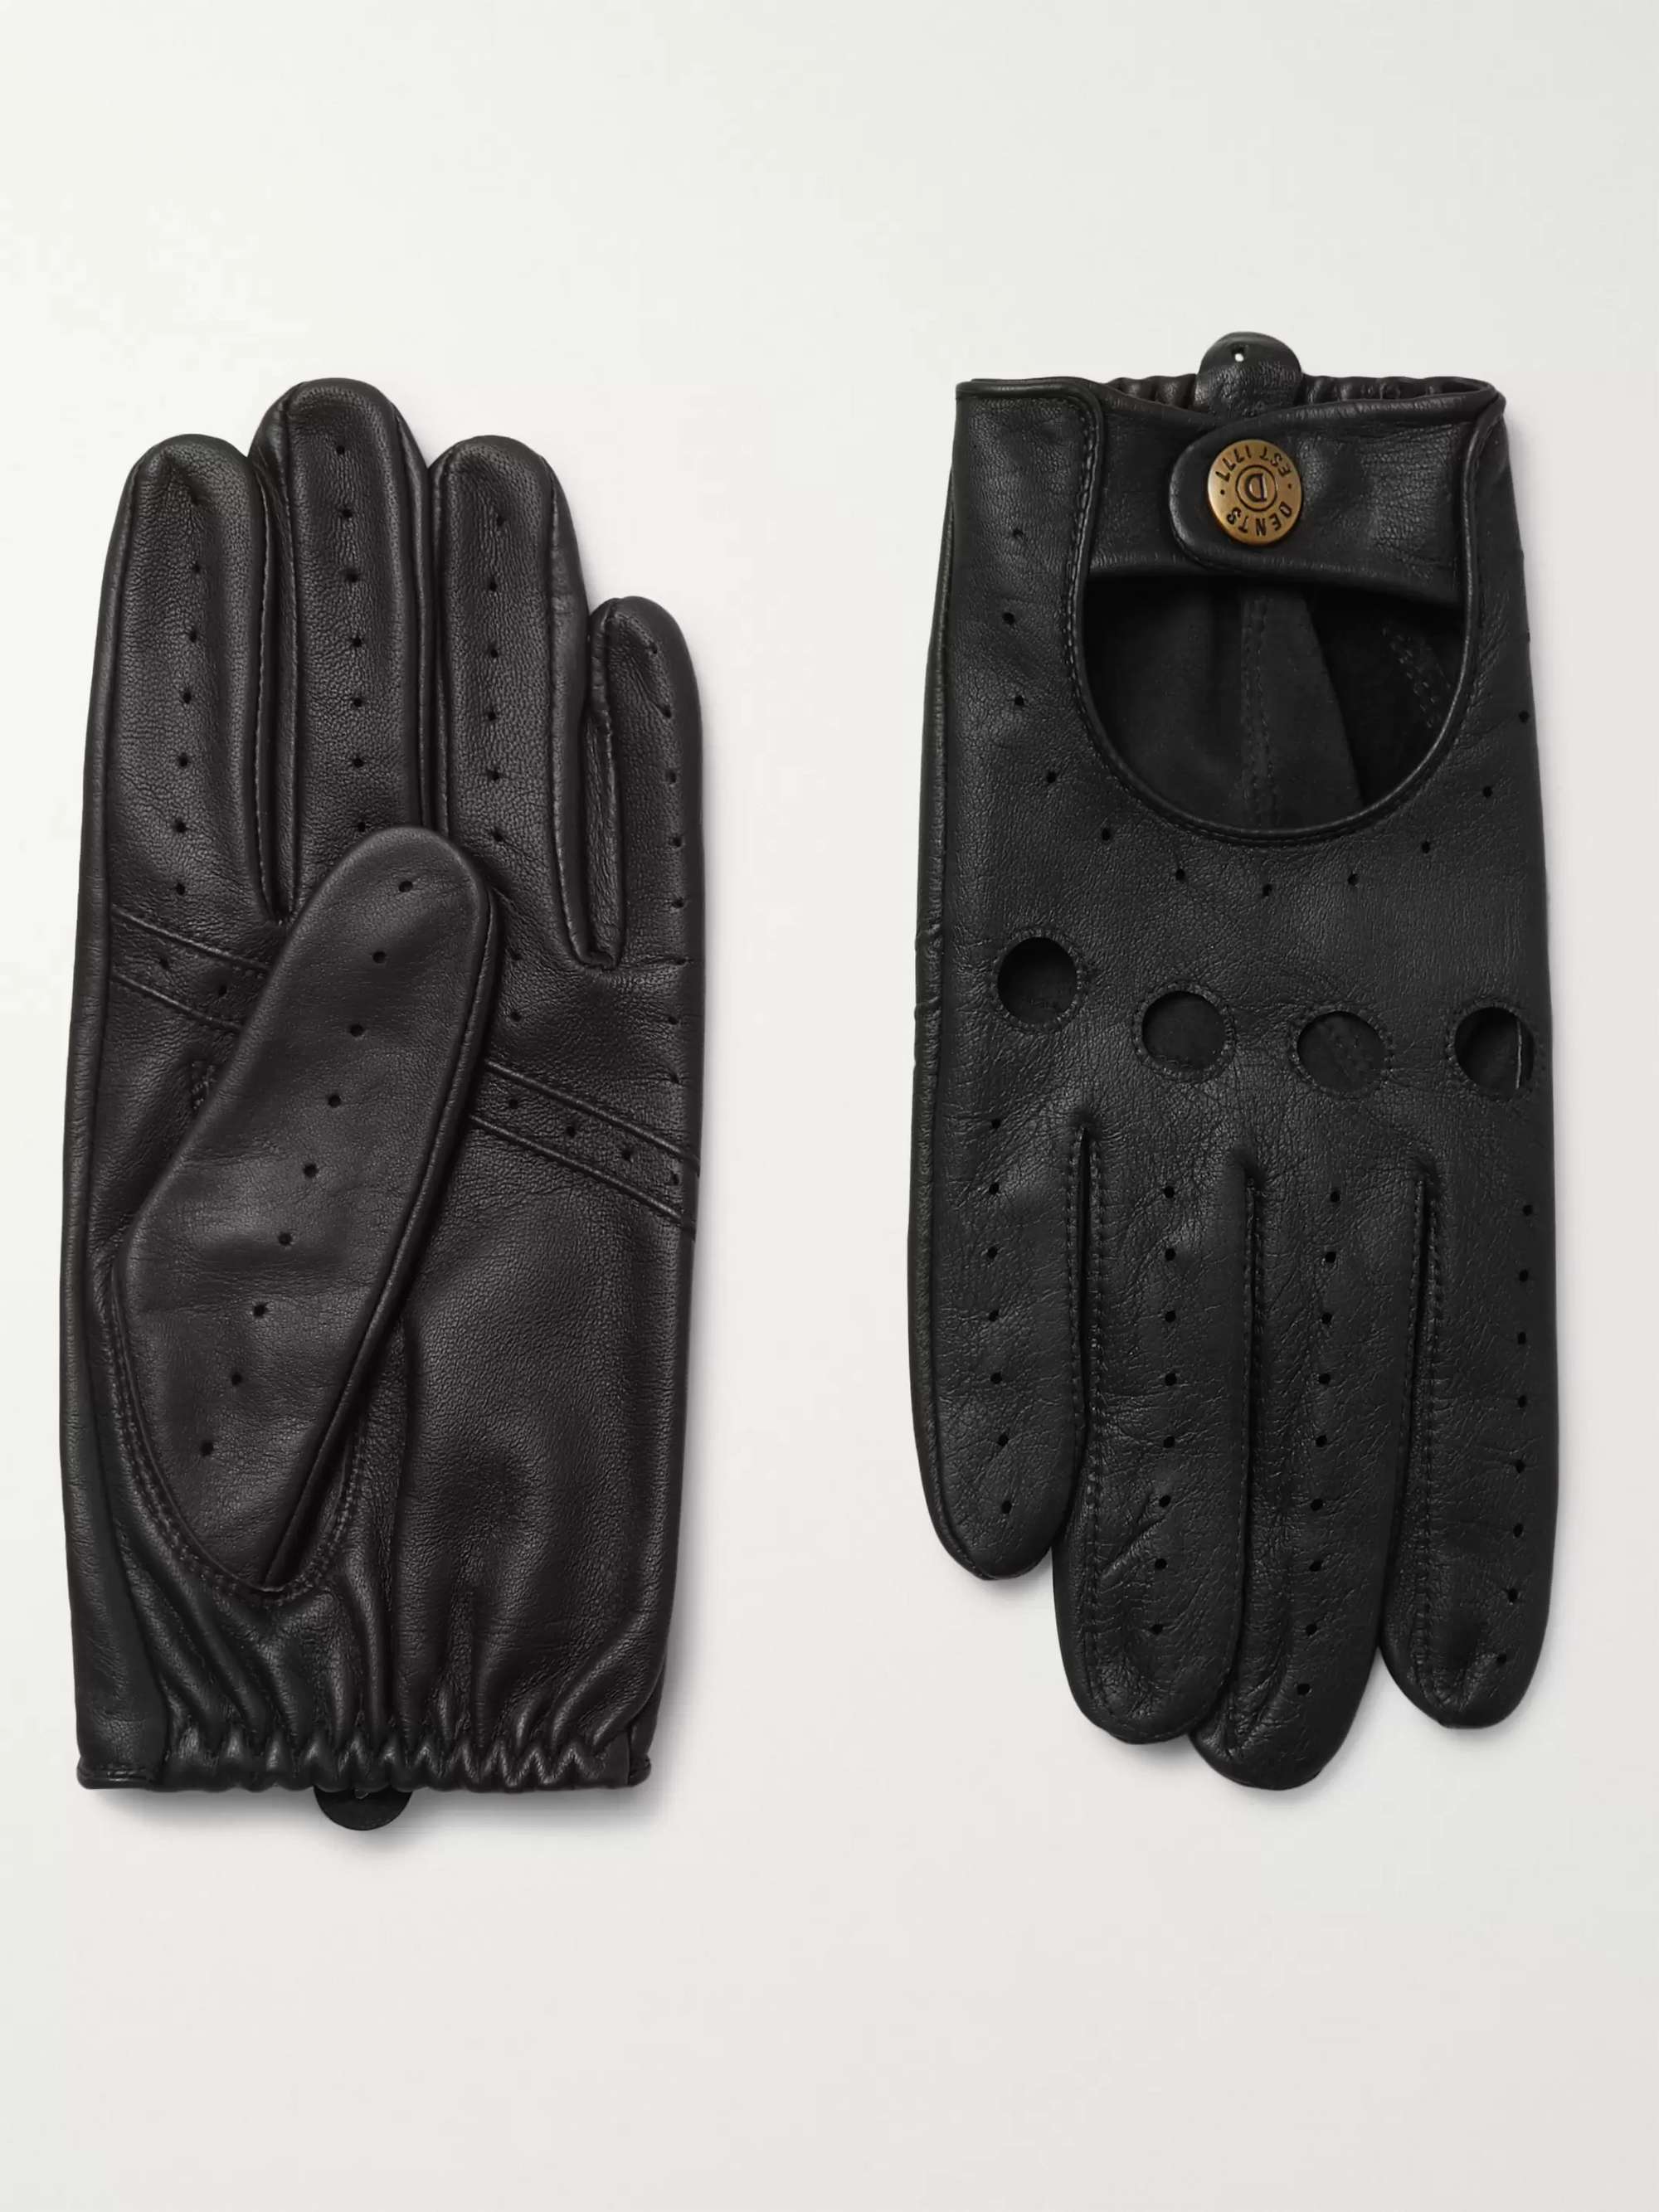 DENTS Silverstone Touchscreen Leather Driving Gloves